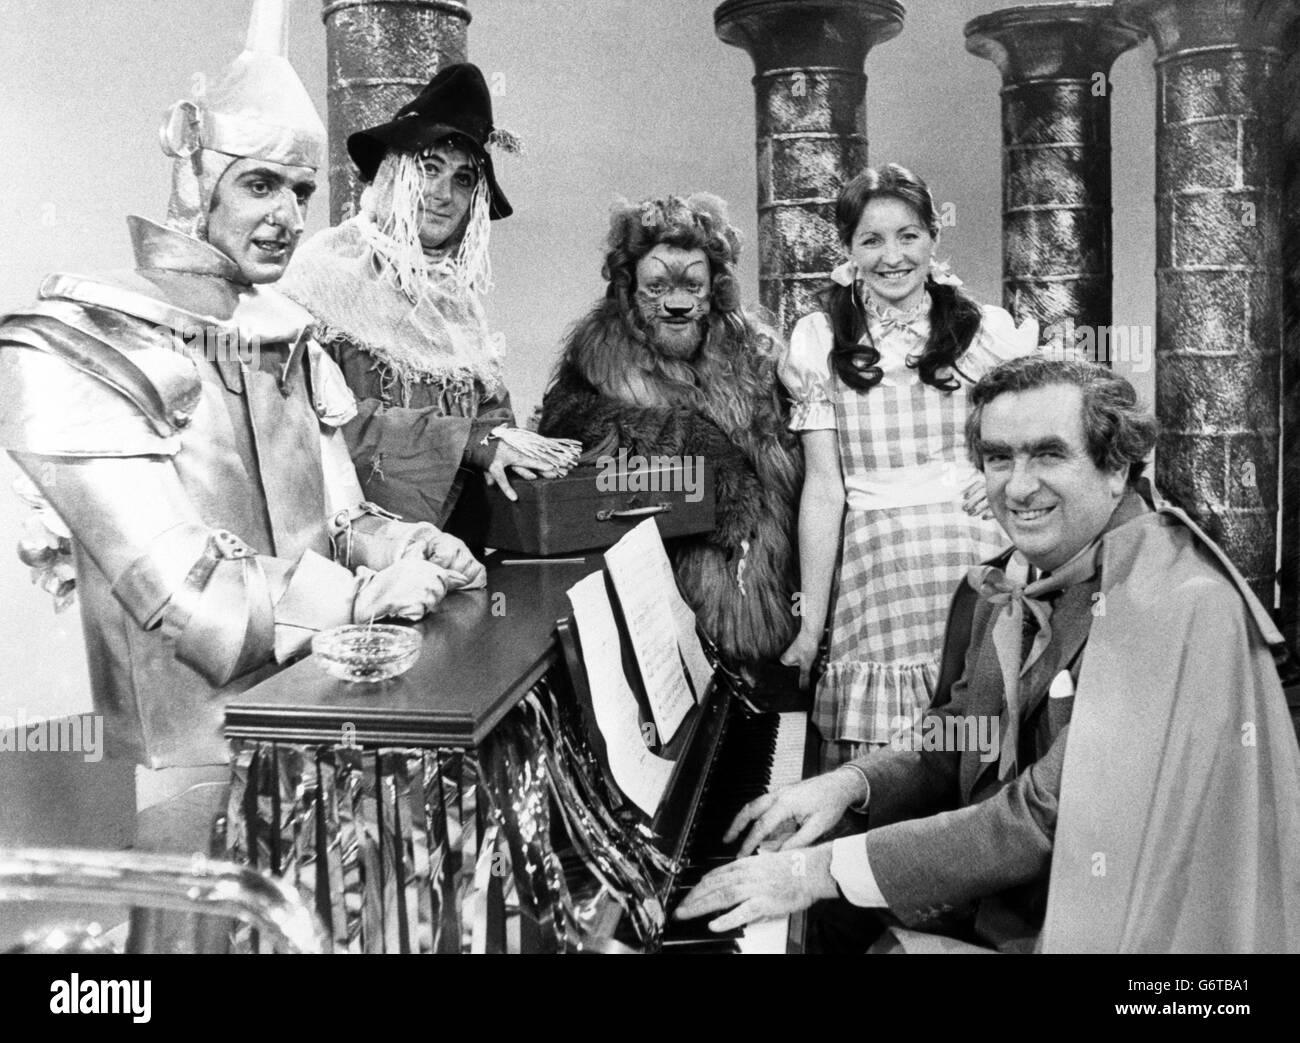 Joining in the Christmas fun is Chancellor of the Exchequer Denis Healey during rehearsals for Nationwide's version of 'The Wizard of Oz', to be broadcast on BBC One. In this scene, set at the turnstile of the wizard's castle, Nationwide presenters Sue Lawley (as Dorothy), John Stapleton (Tin man), Bob Wellings (Straw man) and Richard Stilgoe (Lion) encounter Mr Healey, who is cloaked and playing 'Over the Rainbow', with a red despatch box perched on the piano. Before anybody can pass Healey asks for a contribution to the IMF - the International Magicians' Fund. Stock Photo